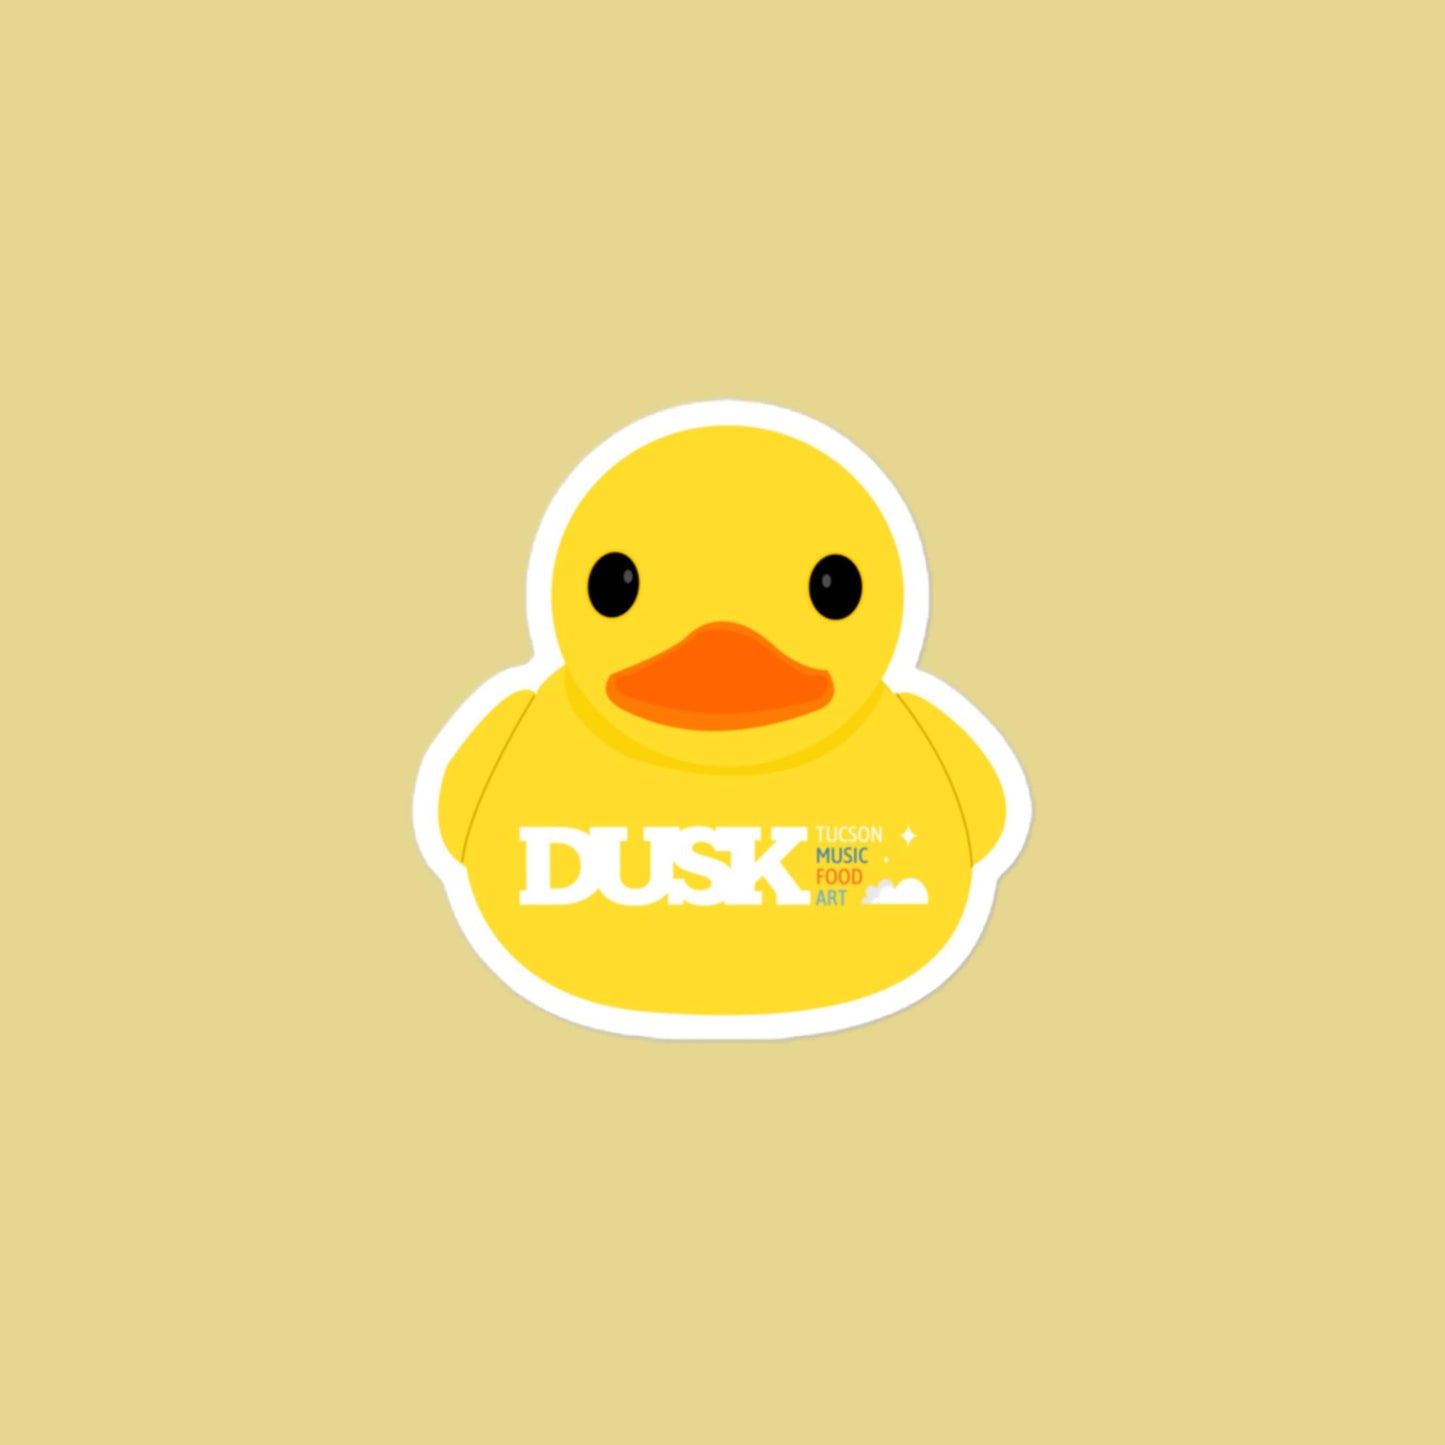 Rubber Duckie, You're the One - Bubble-free Sticker